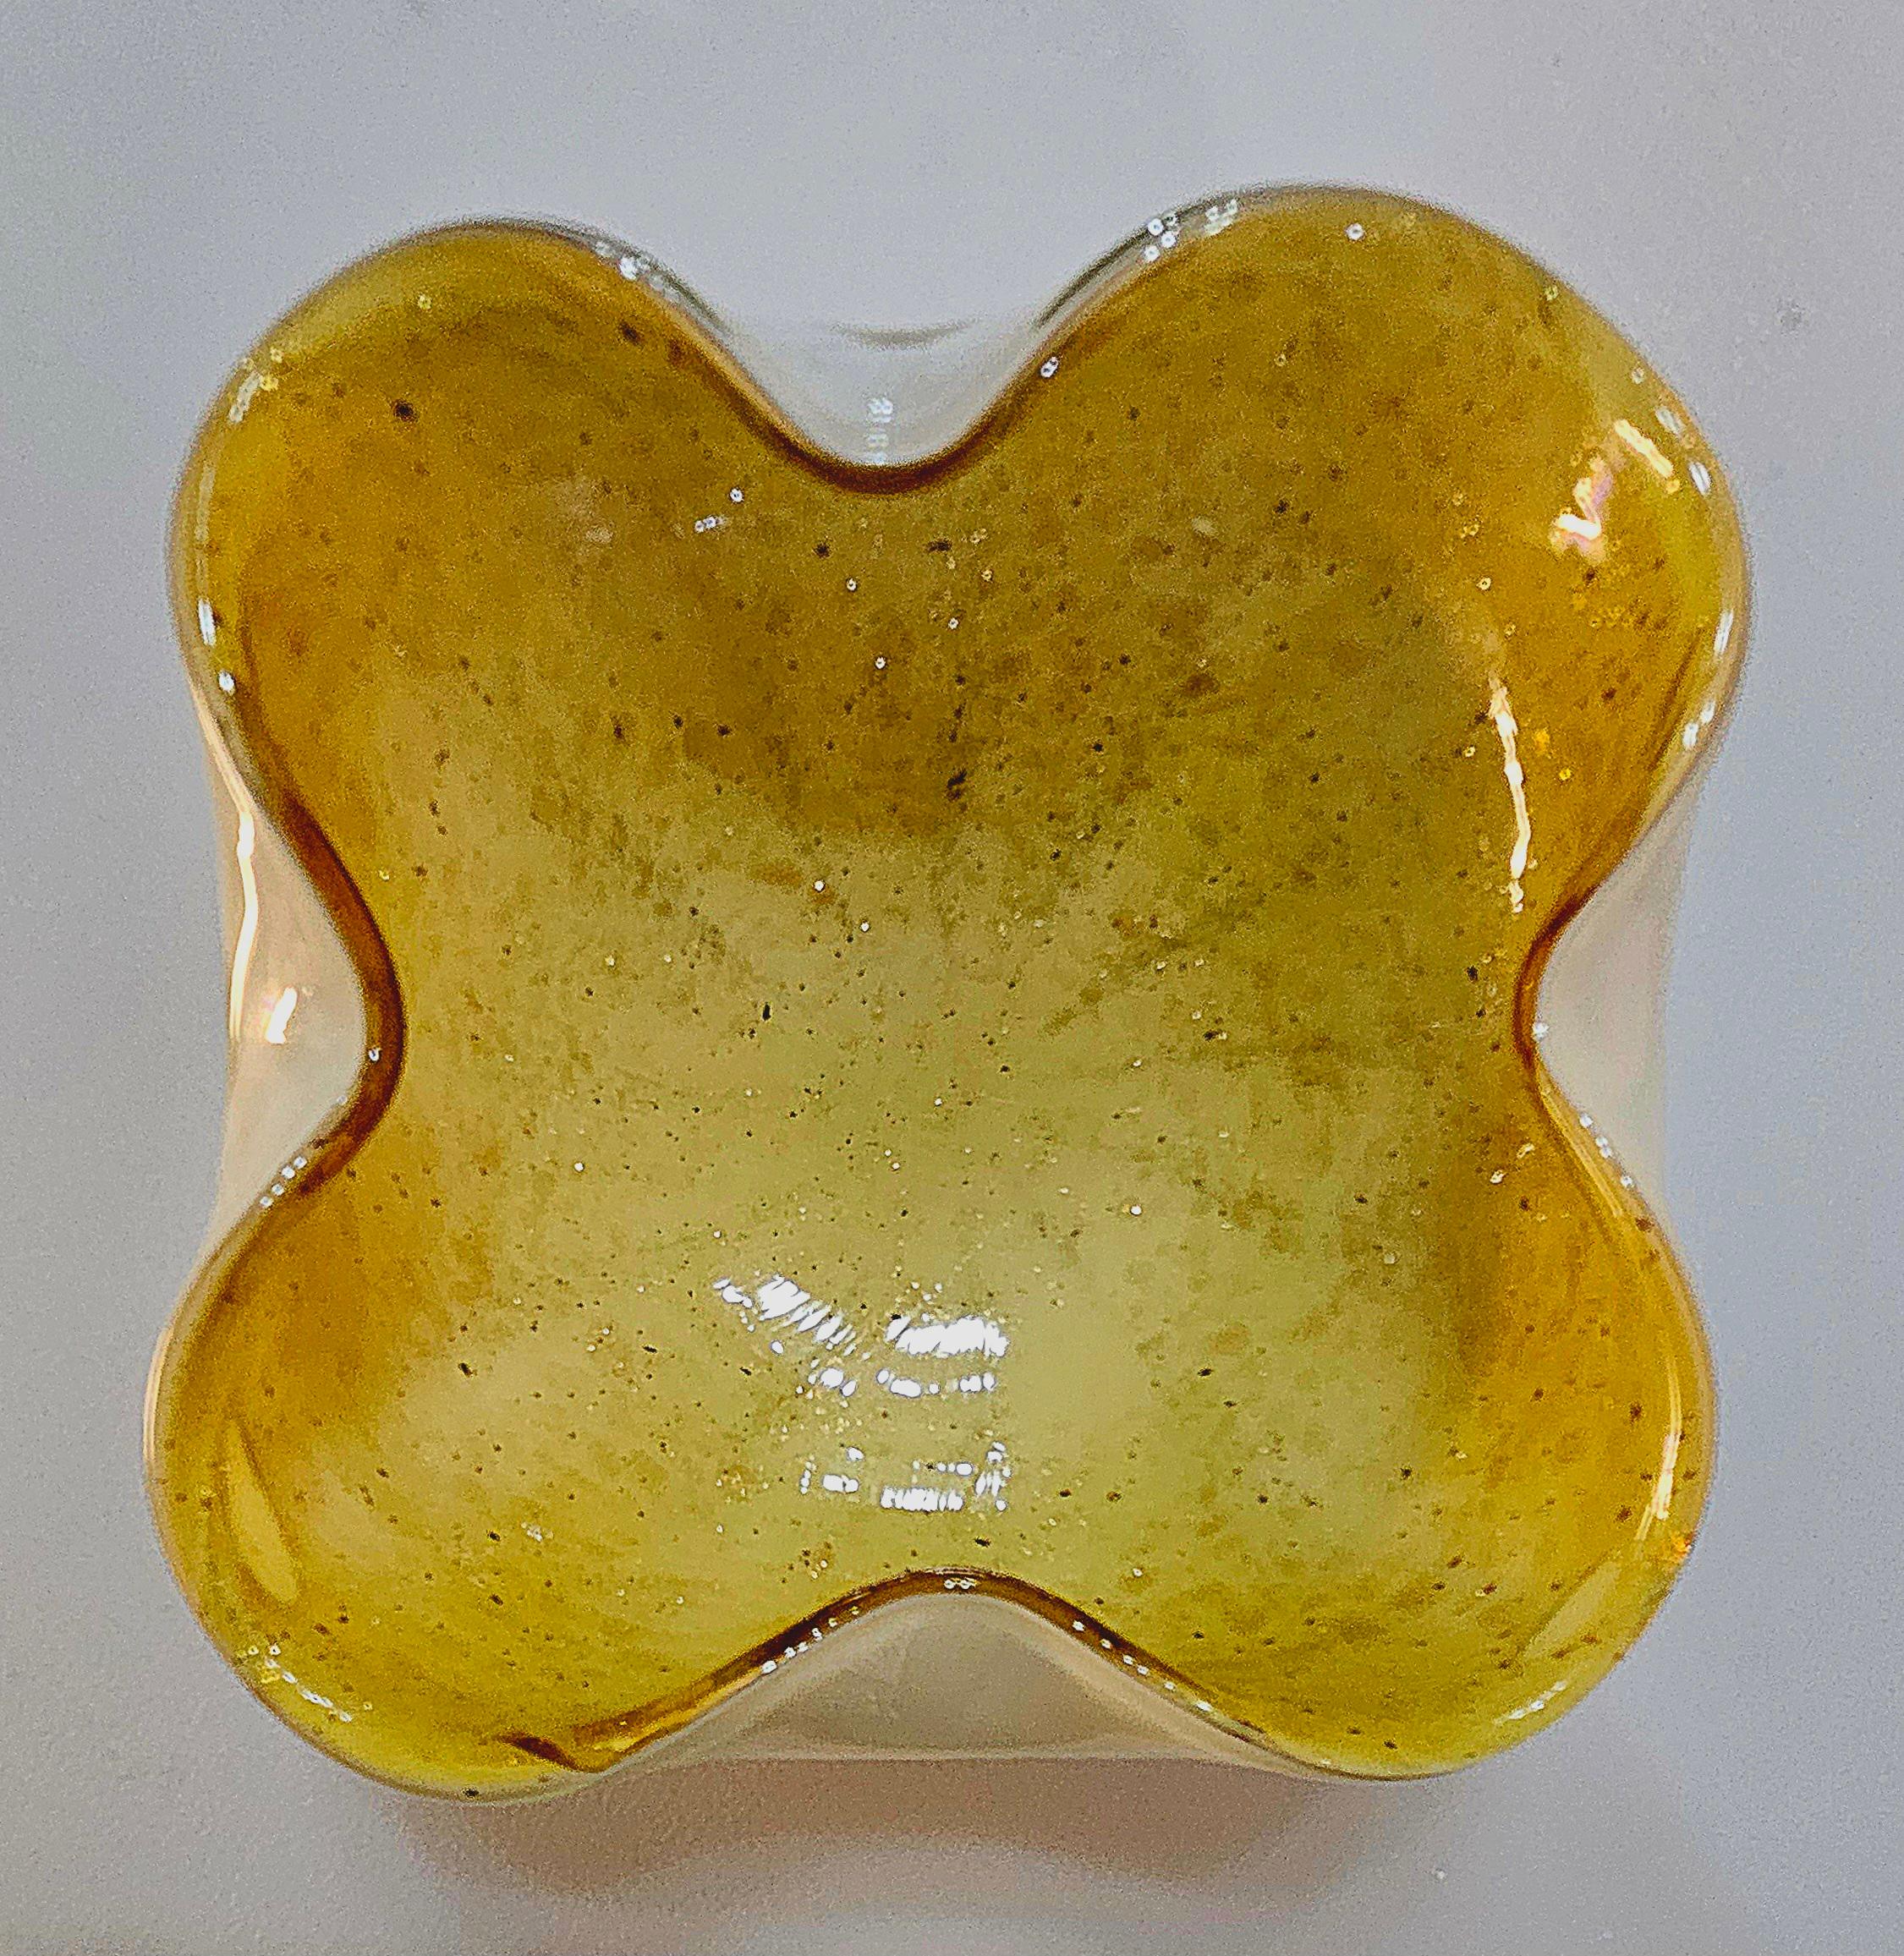 Mid-Century Modern Vintage Murano Glass Bowl / Dish / Ashtray / Catch-All For Sale